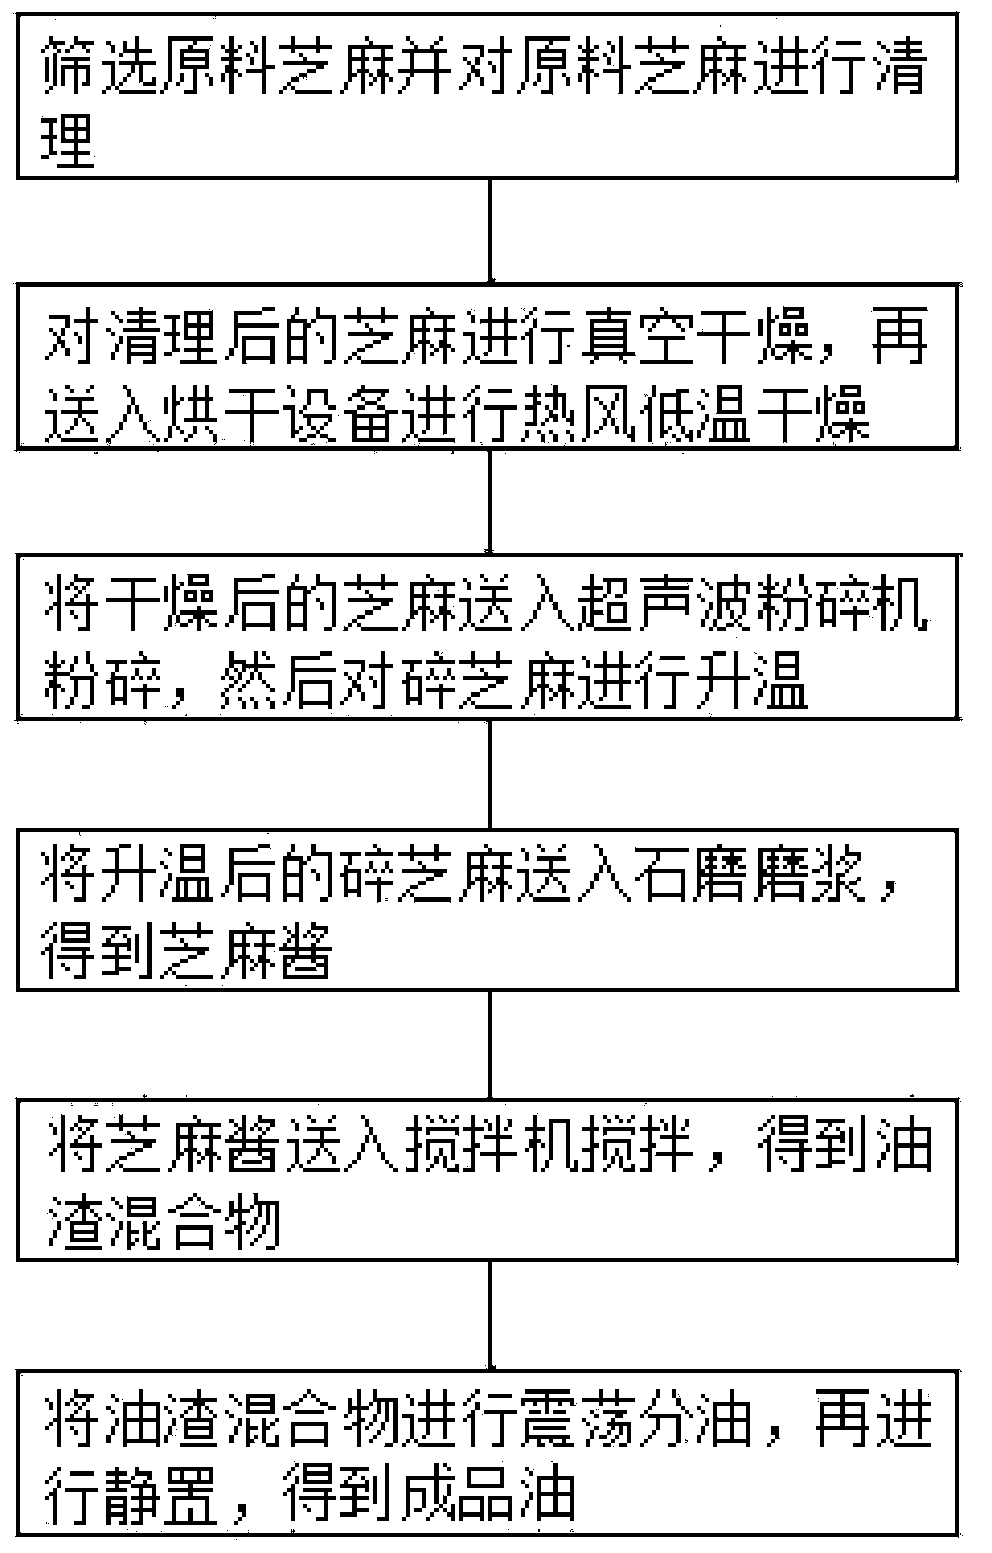 Method for processing sesame oil by stone mill